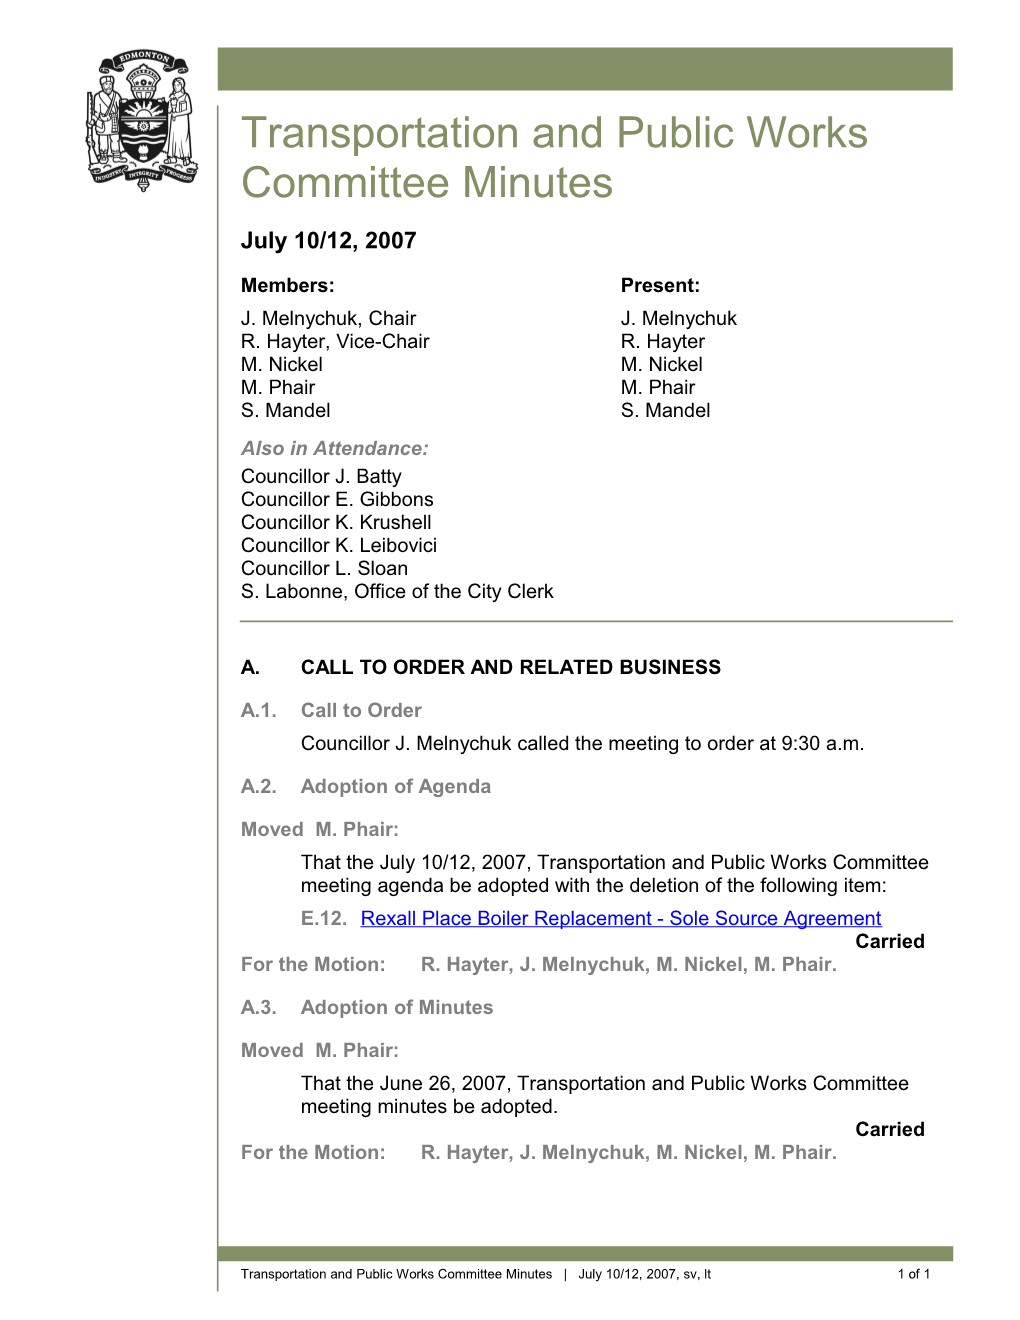 Minutes for Transportation and Public Works Committee July 10, 2007 Meeting